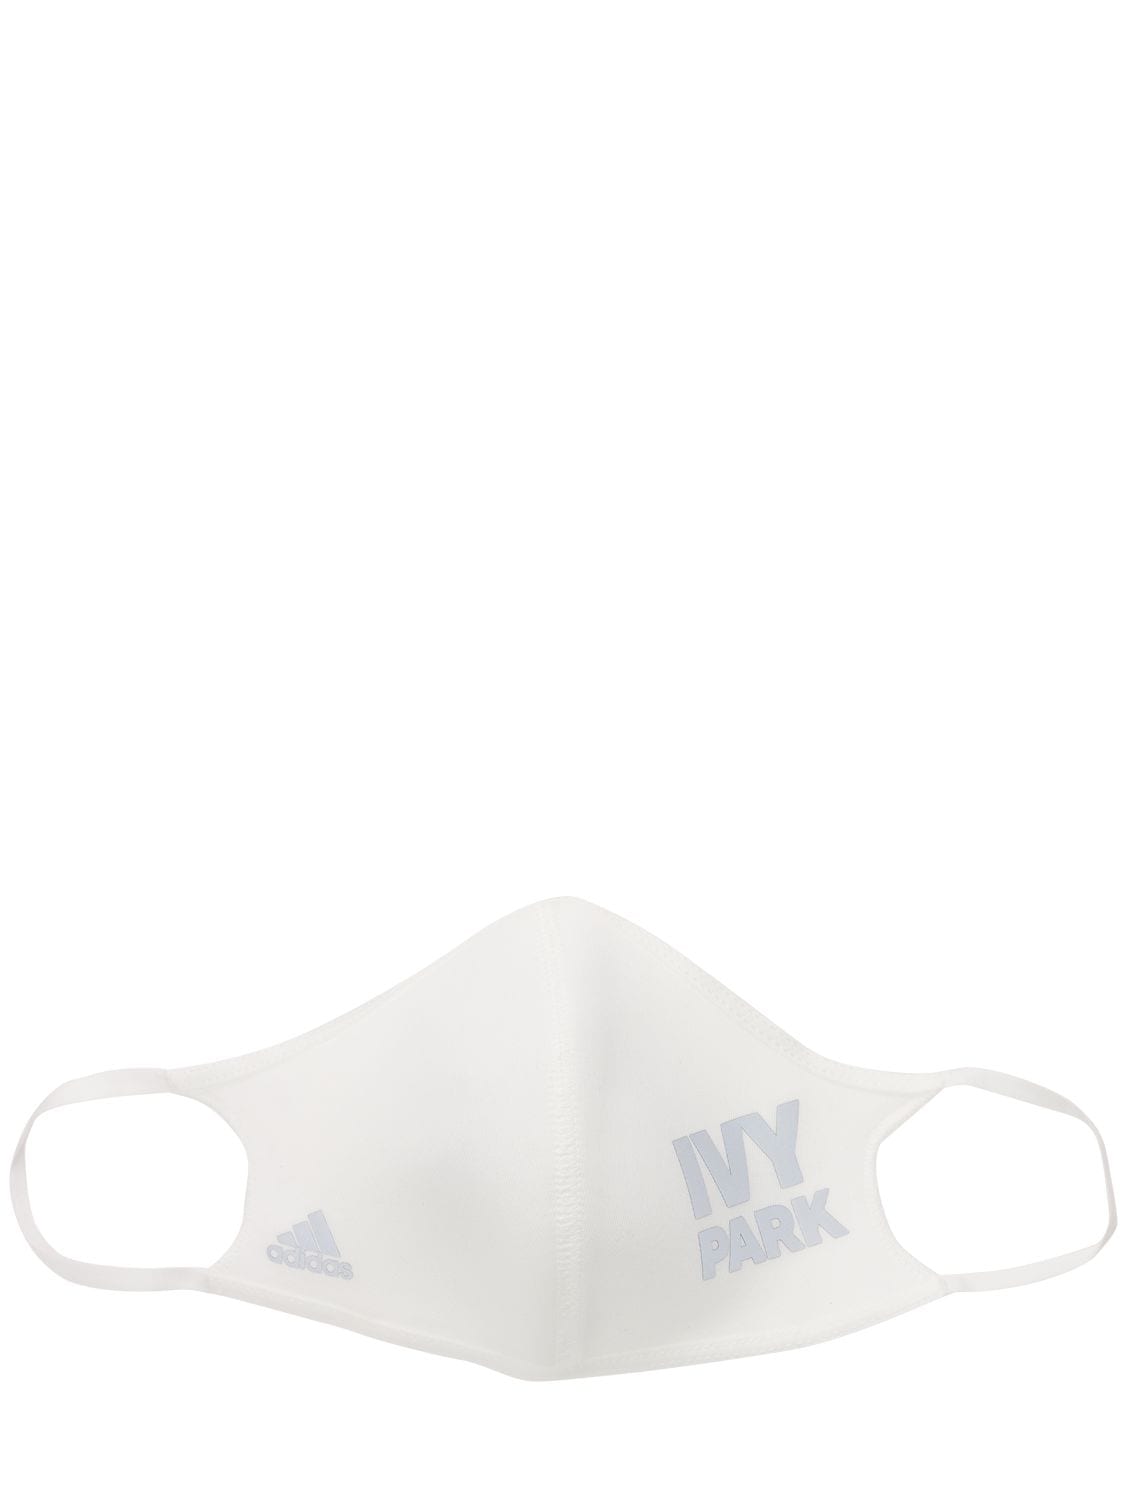 Adidas X Ivy Park 3 Pack Of Reflective Masks In White